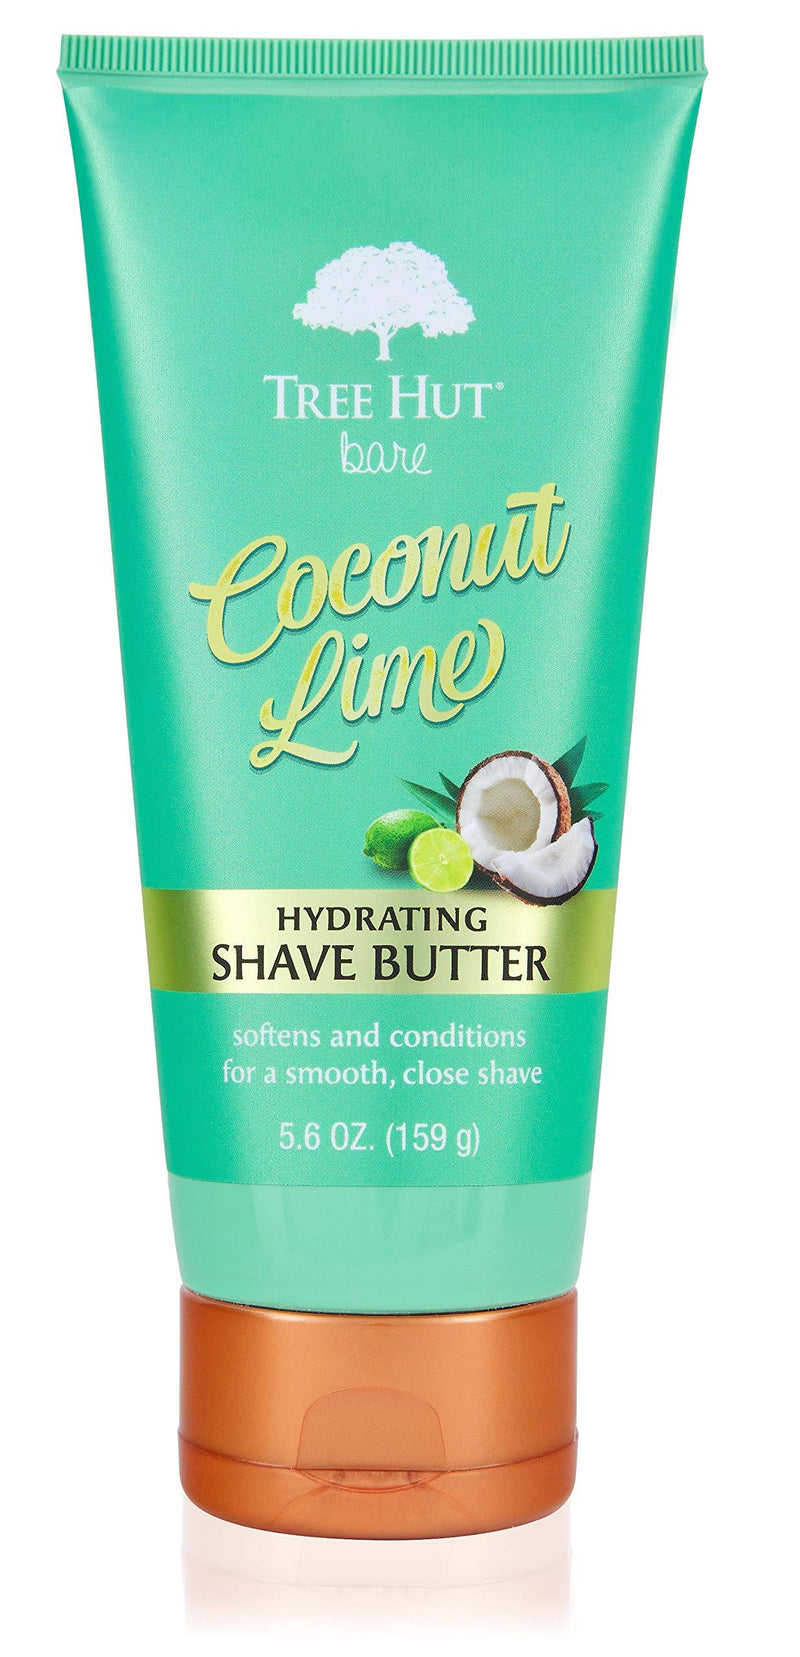 Tree Hut Bare Coconut Lime Hydrating Shave Butter, 5 oz, Essentials for Soft, Smooth, Bare Skin - BeesActive Australia